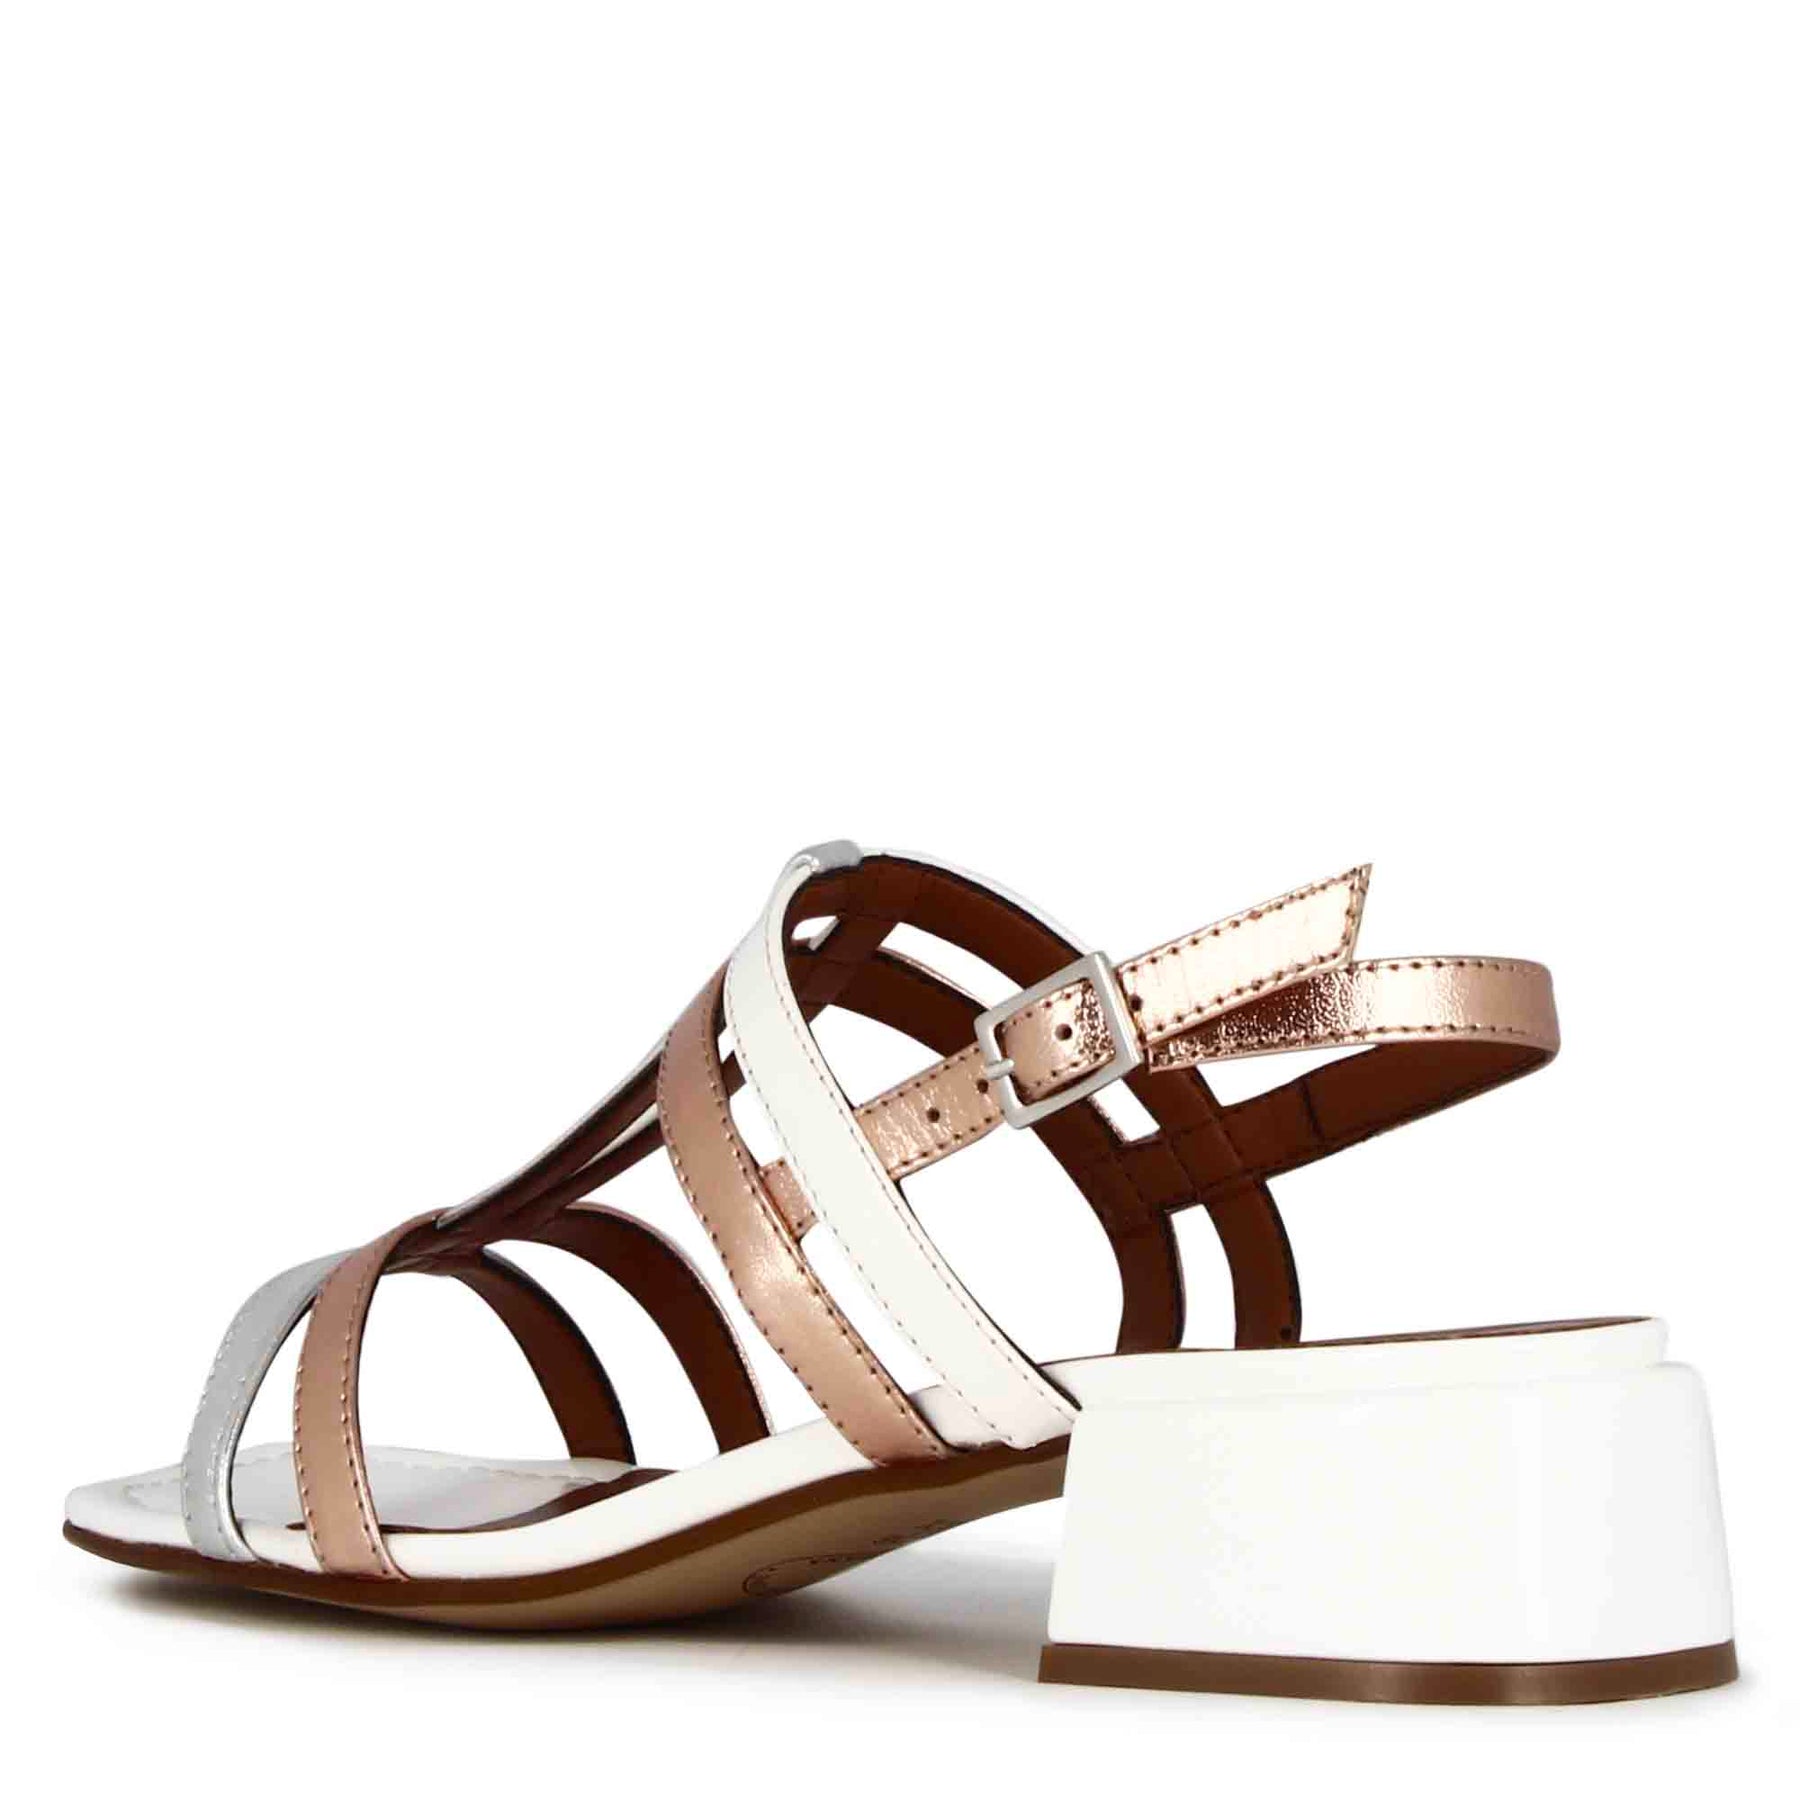 Women's sandal with white and silver patent leather bands